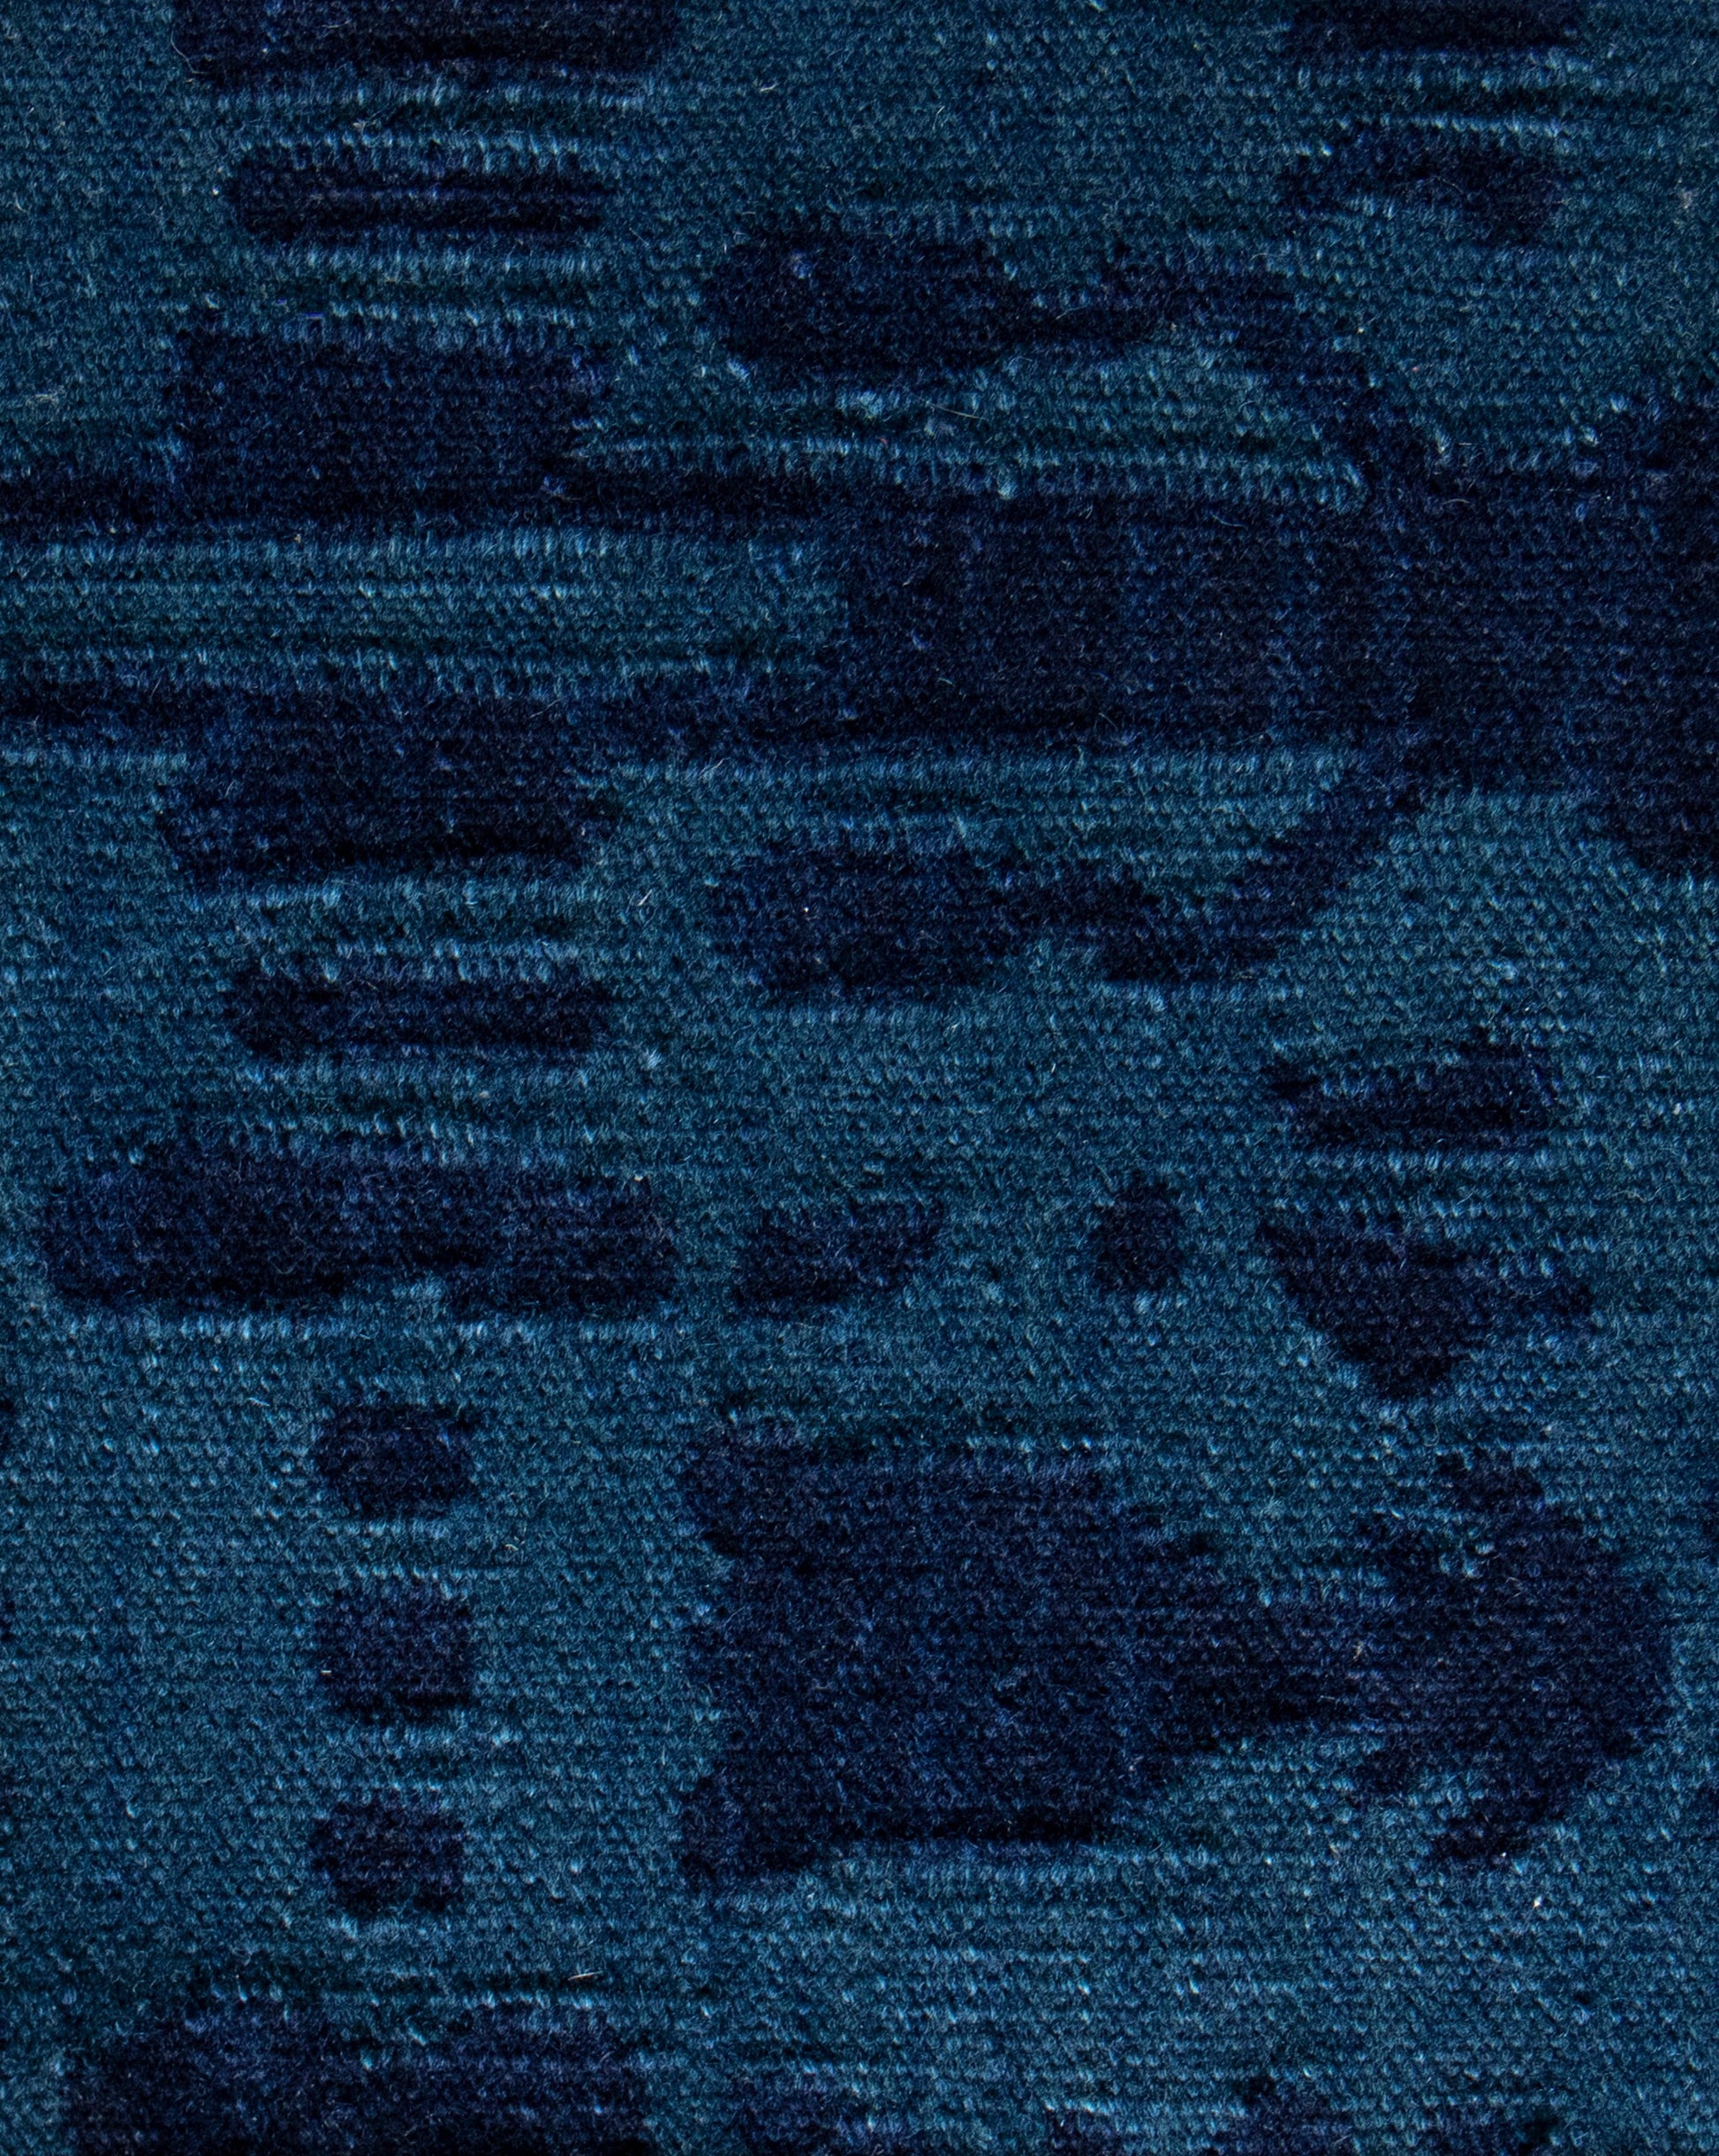 A close up of a blue fabric with Biami Flatweave Rug Deep Indigo pattern and colorway